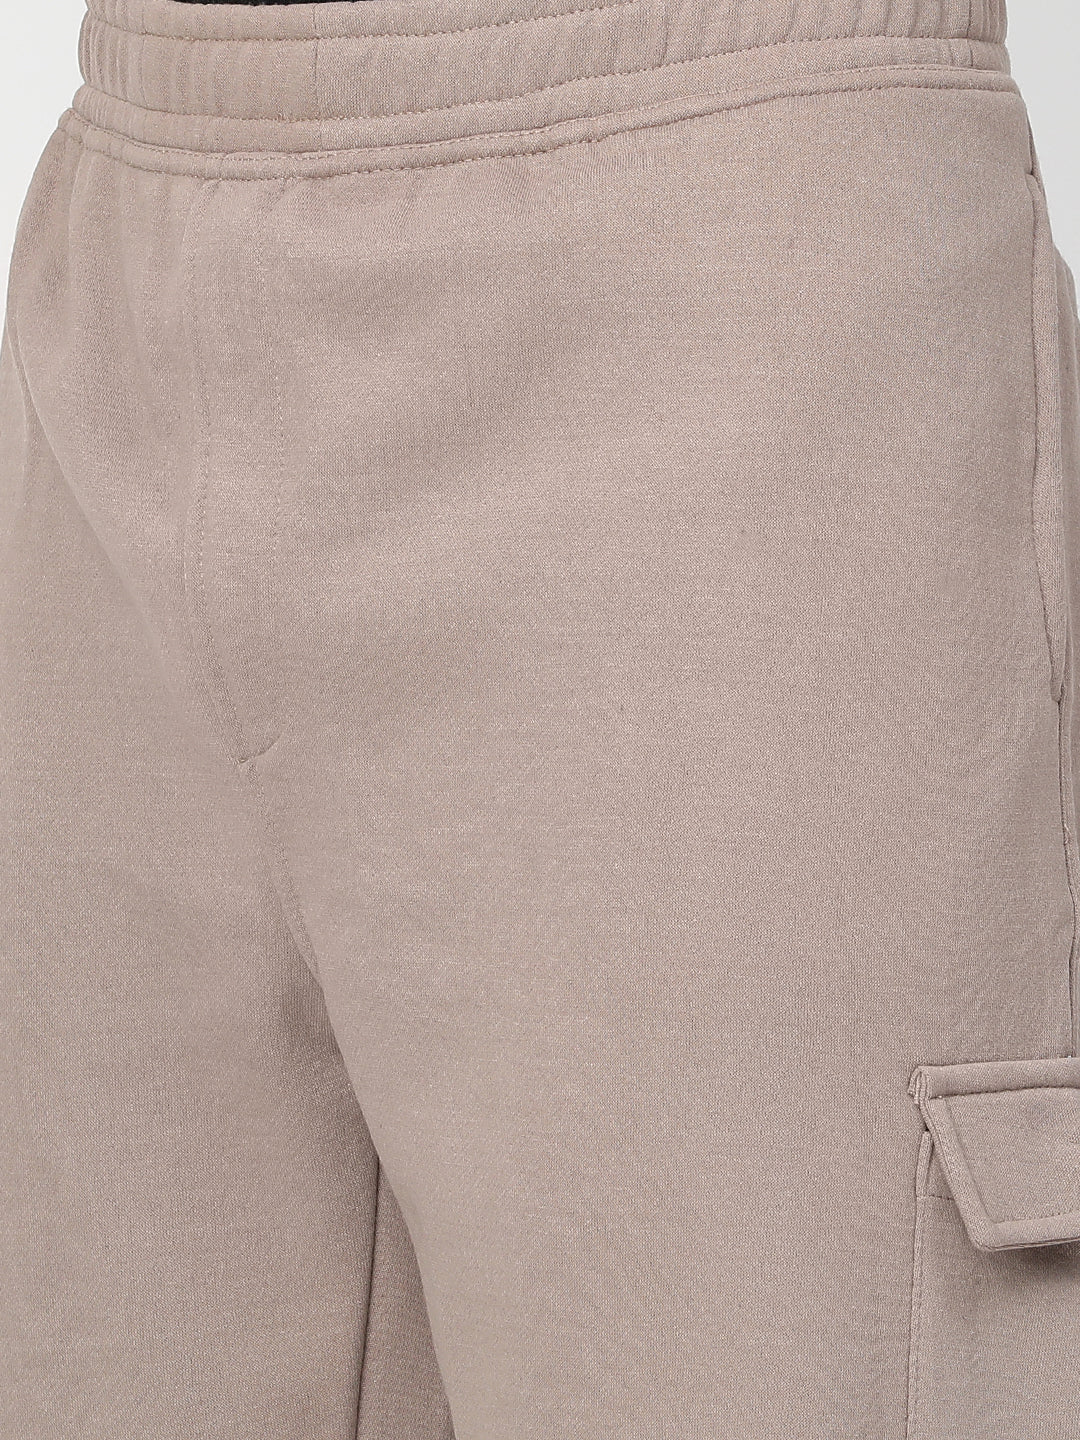 Hemsters Pinkish Grey Track Pant For Men